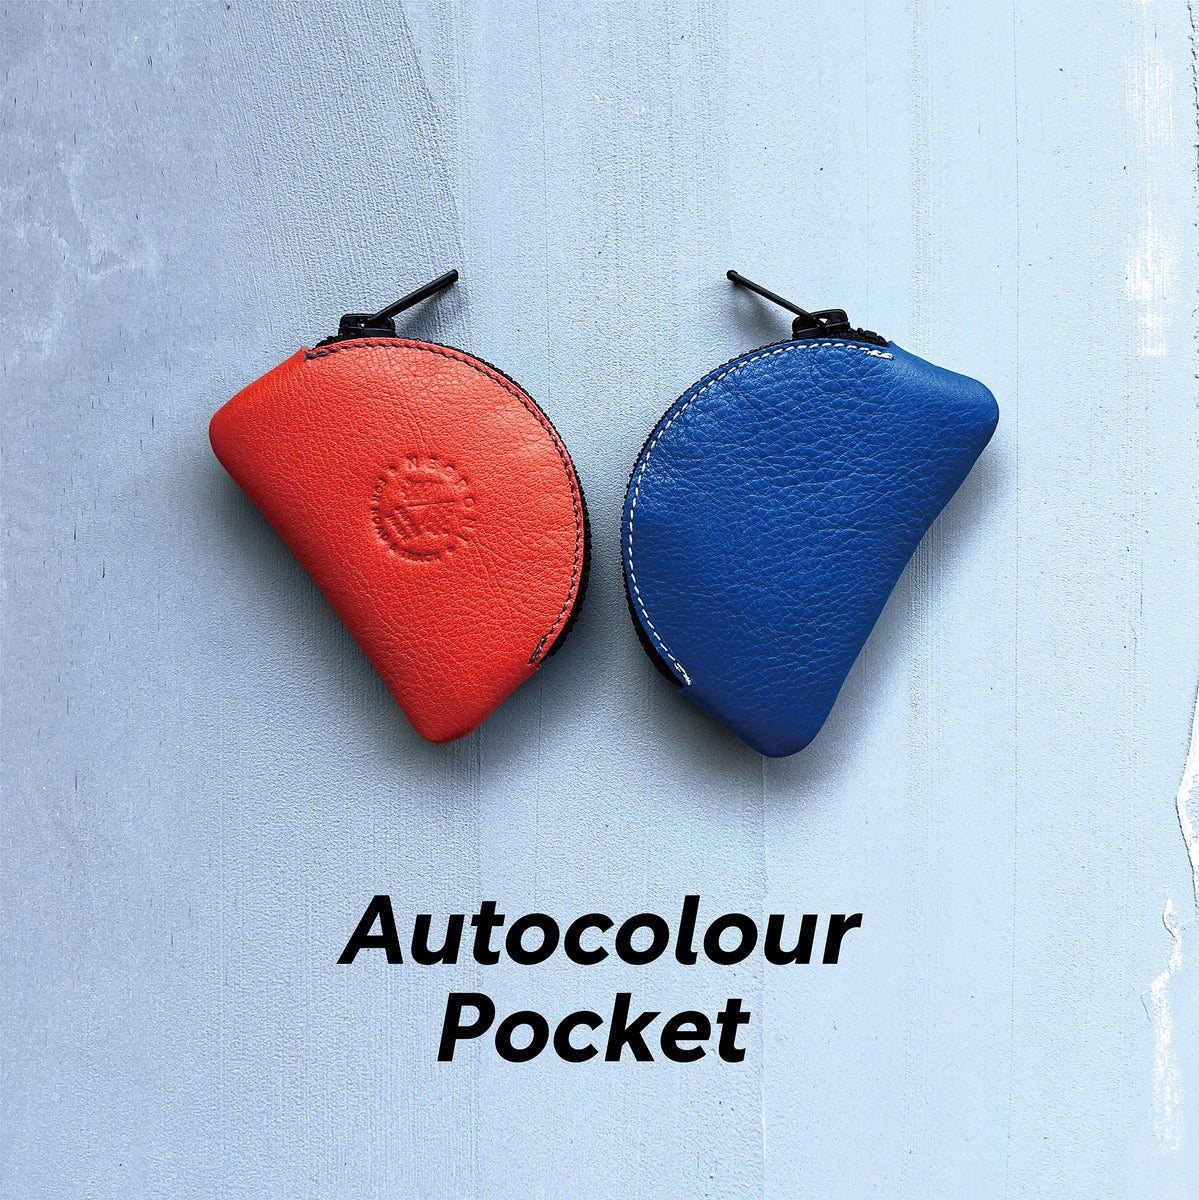 Presenting the new standard auto color pocket.